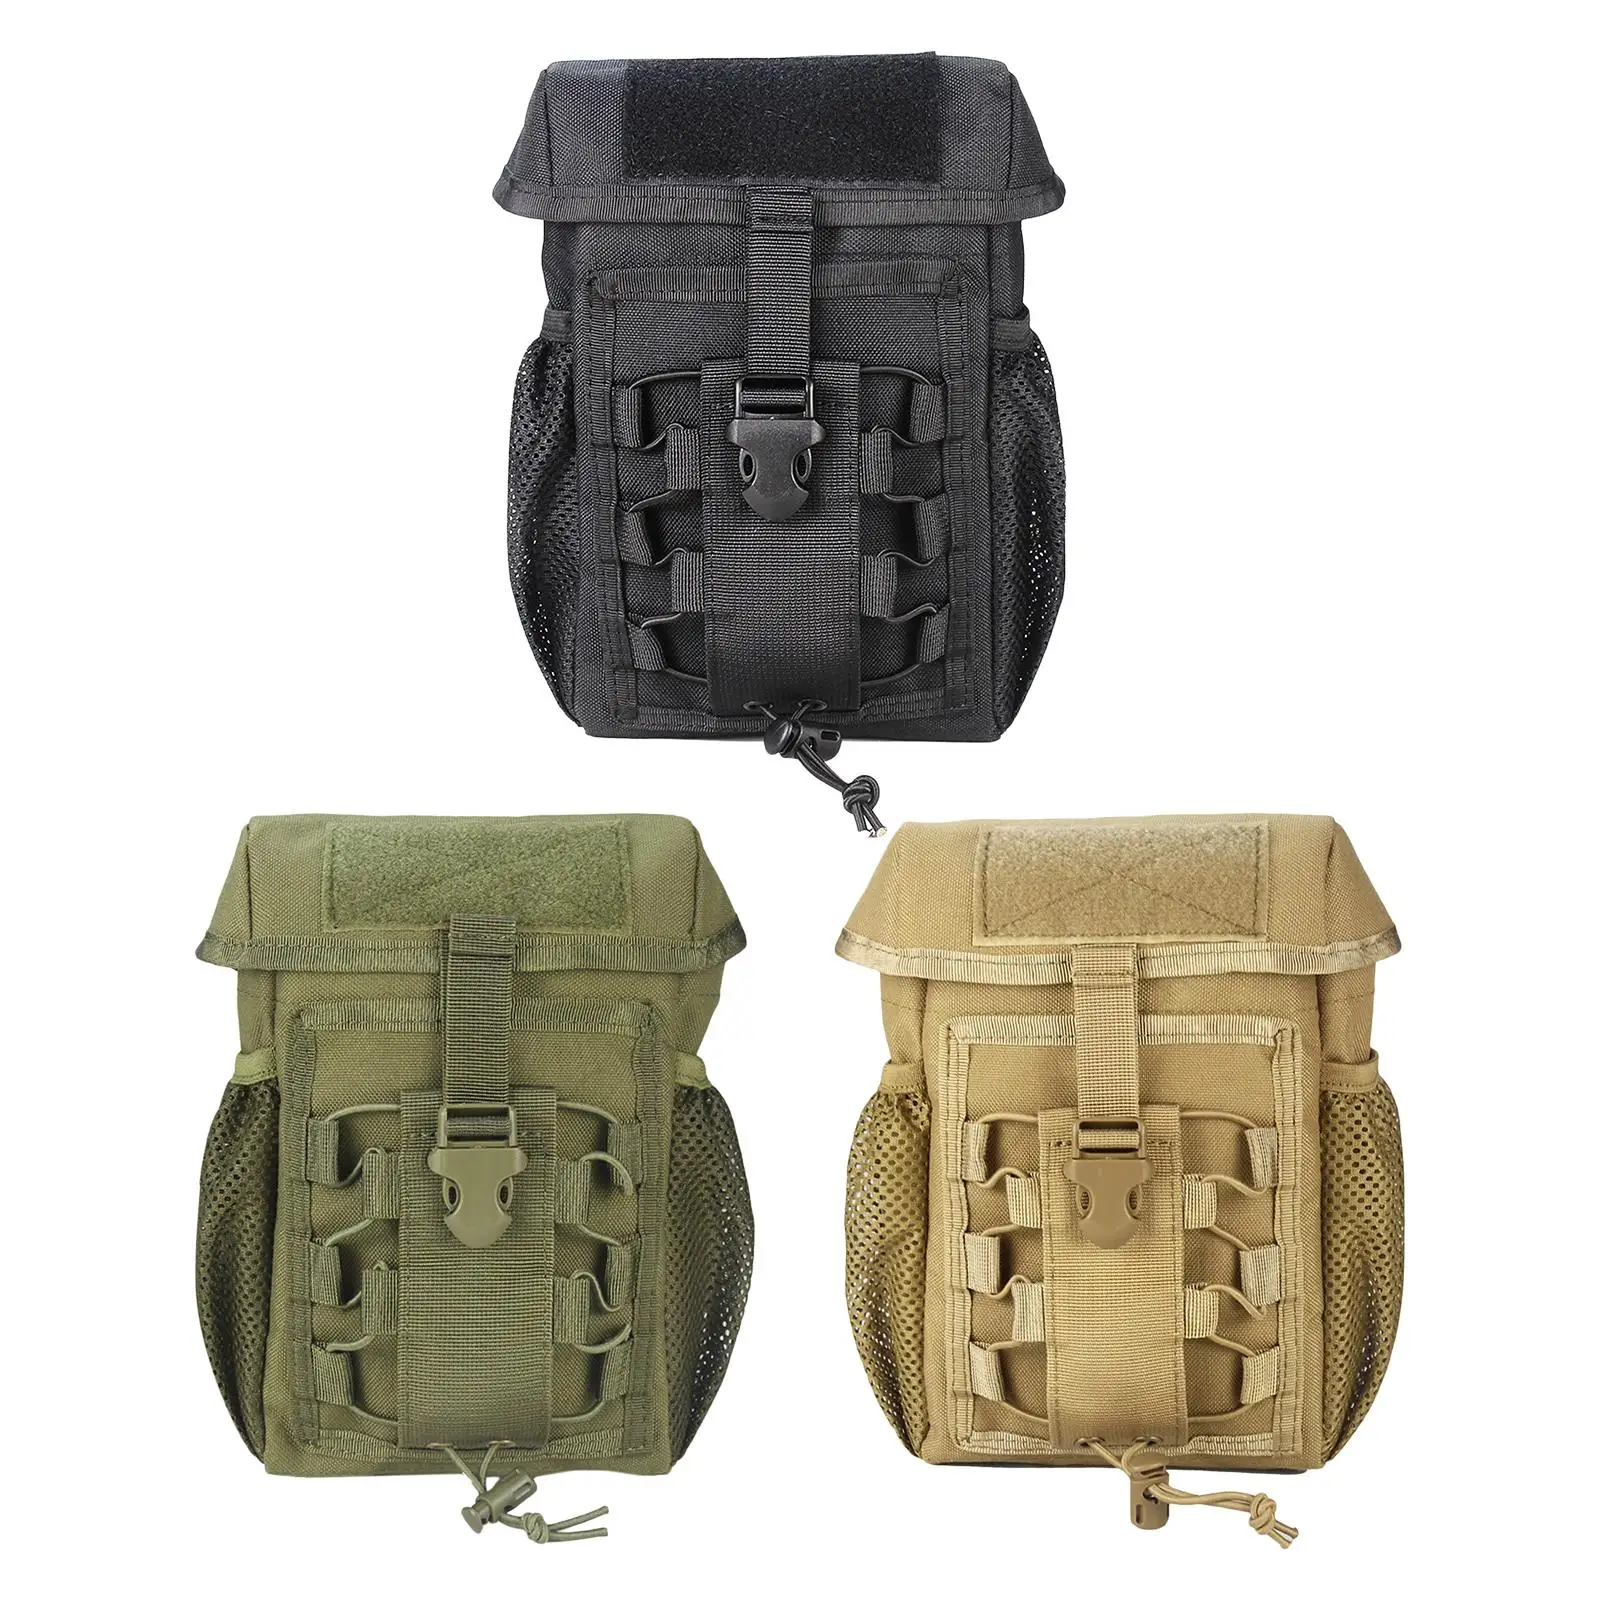 Multi-Pocket Tactical Waist Pack Molle Pouch Accessories Army Organizer Emergency Survival Car Seat Back for Camping First Aid